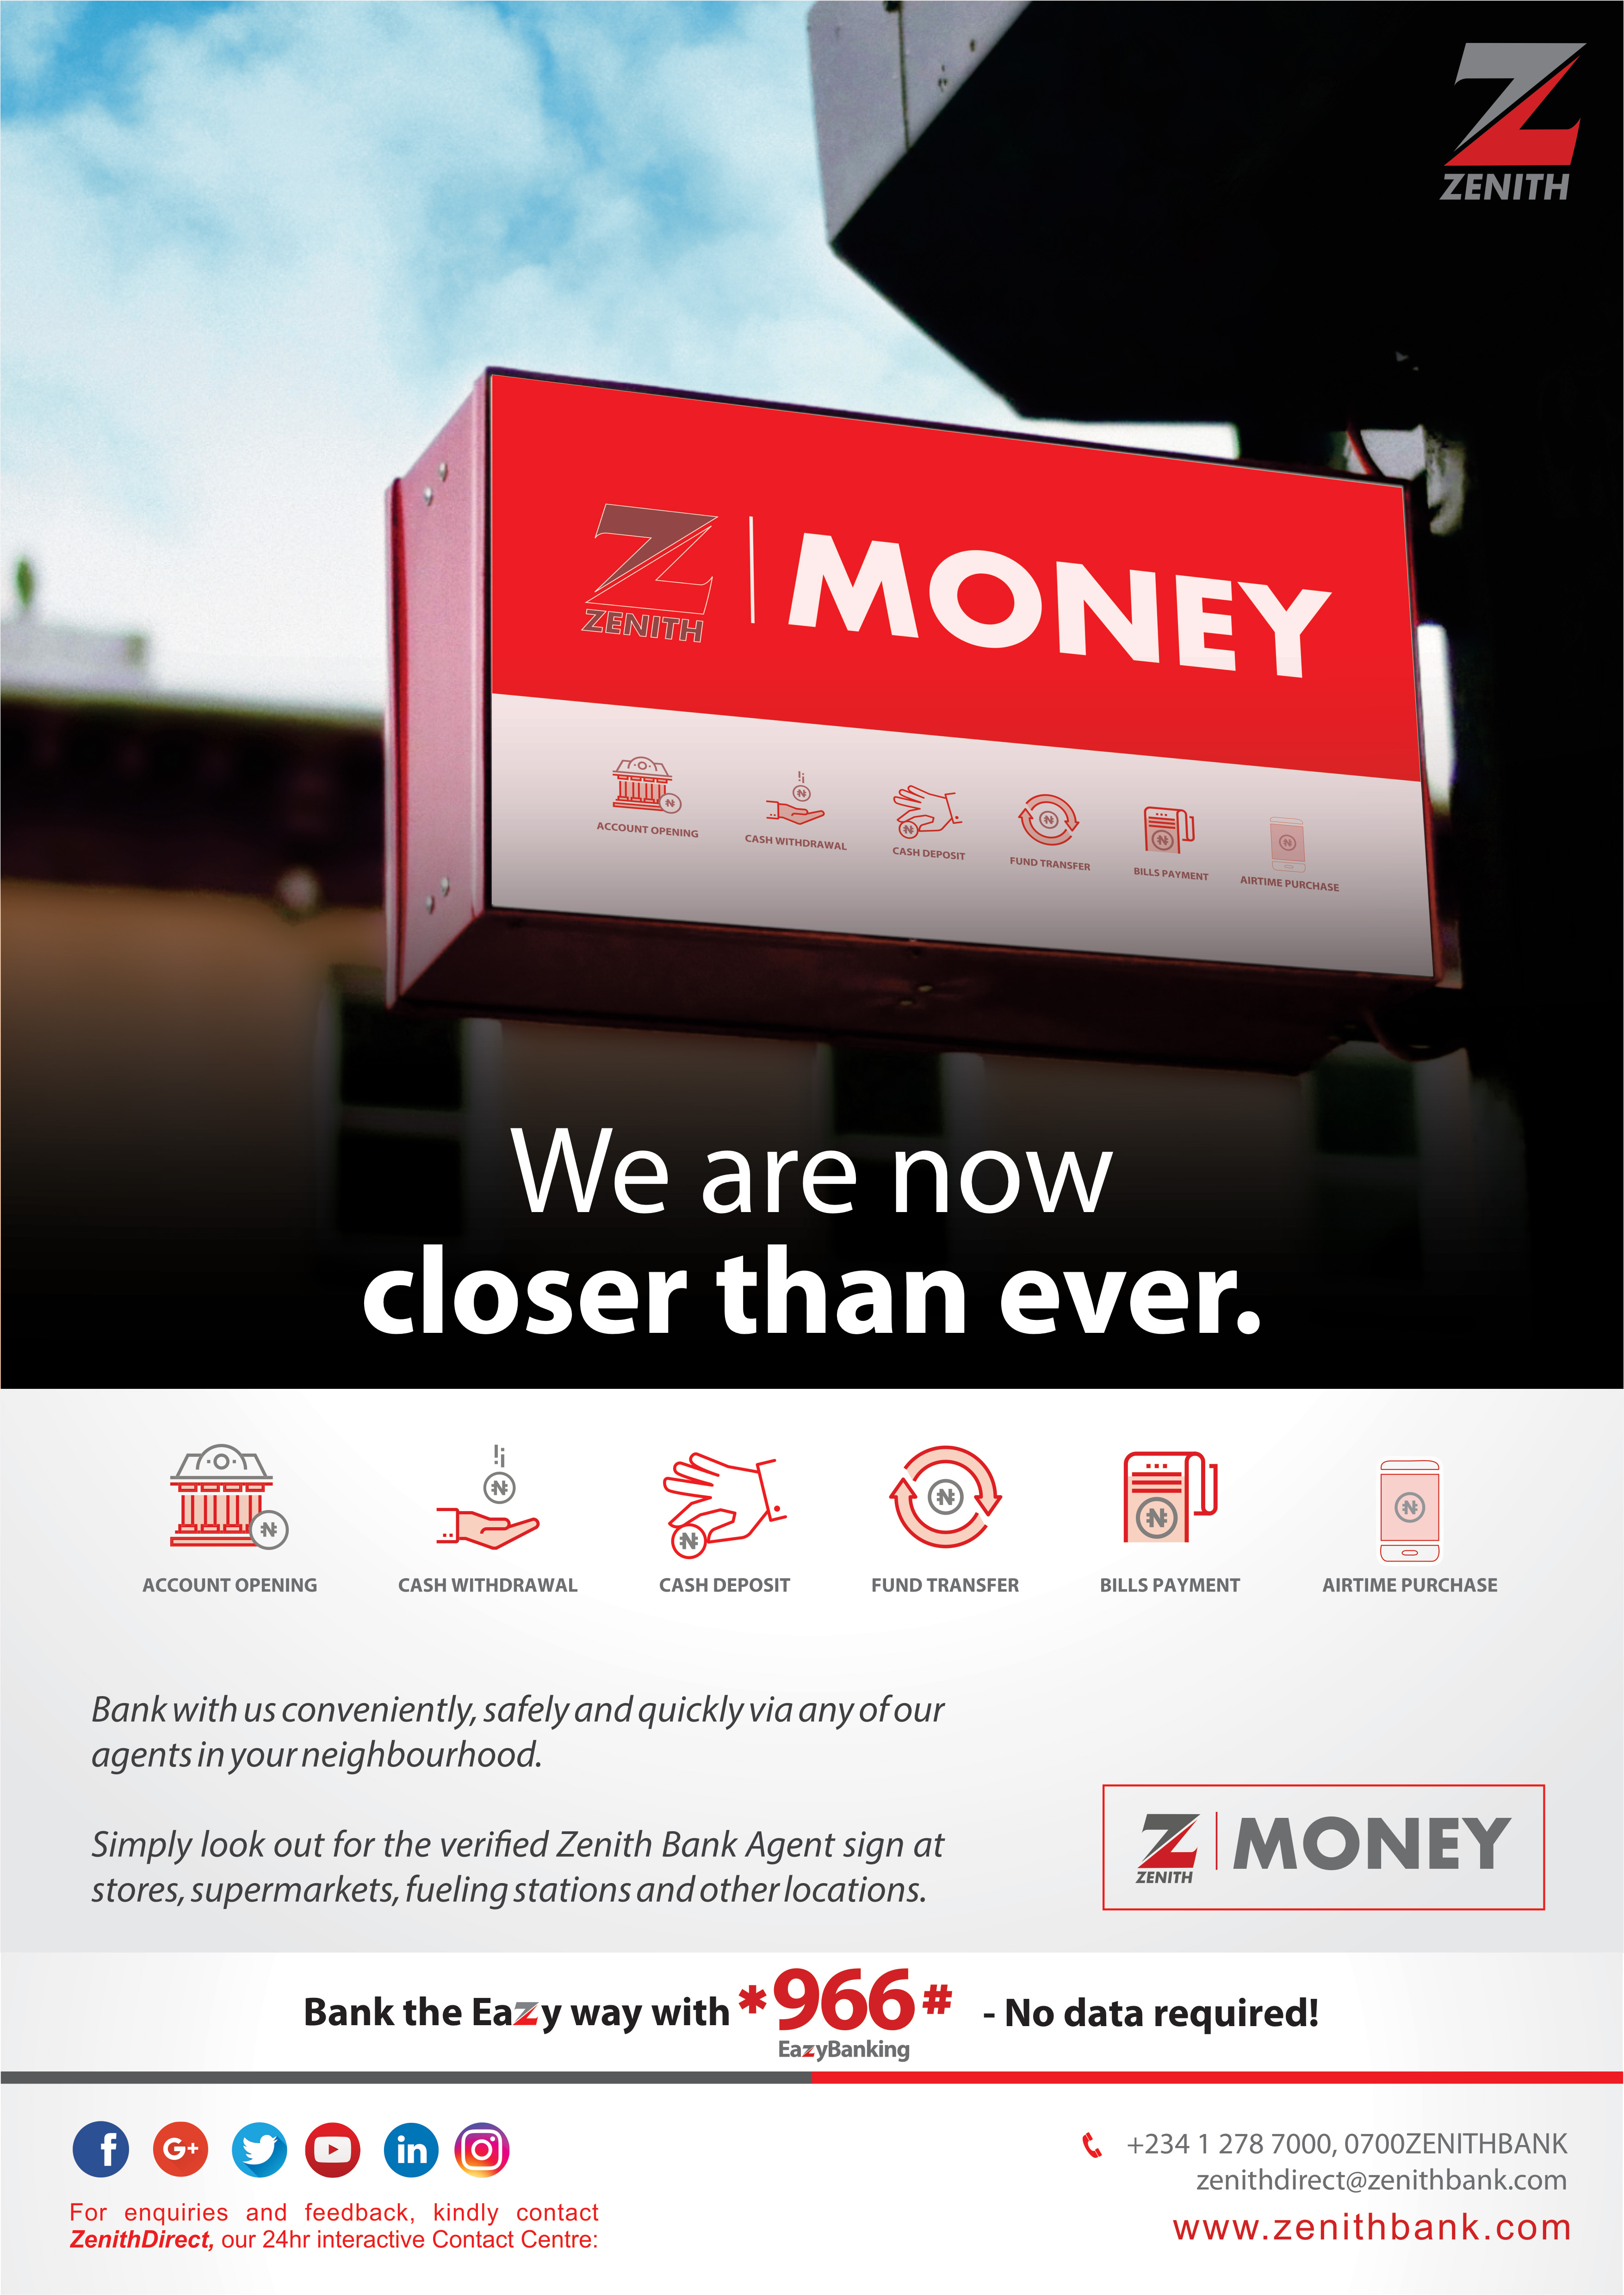 Zenith Bank Launches Z-Money For Convenient Banking And Financial ...